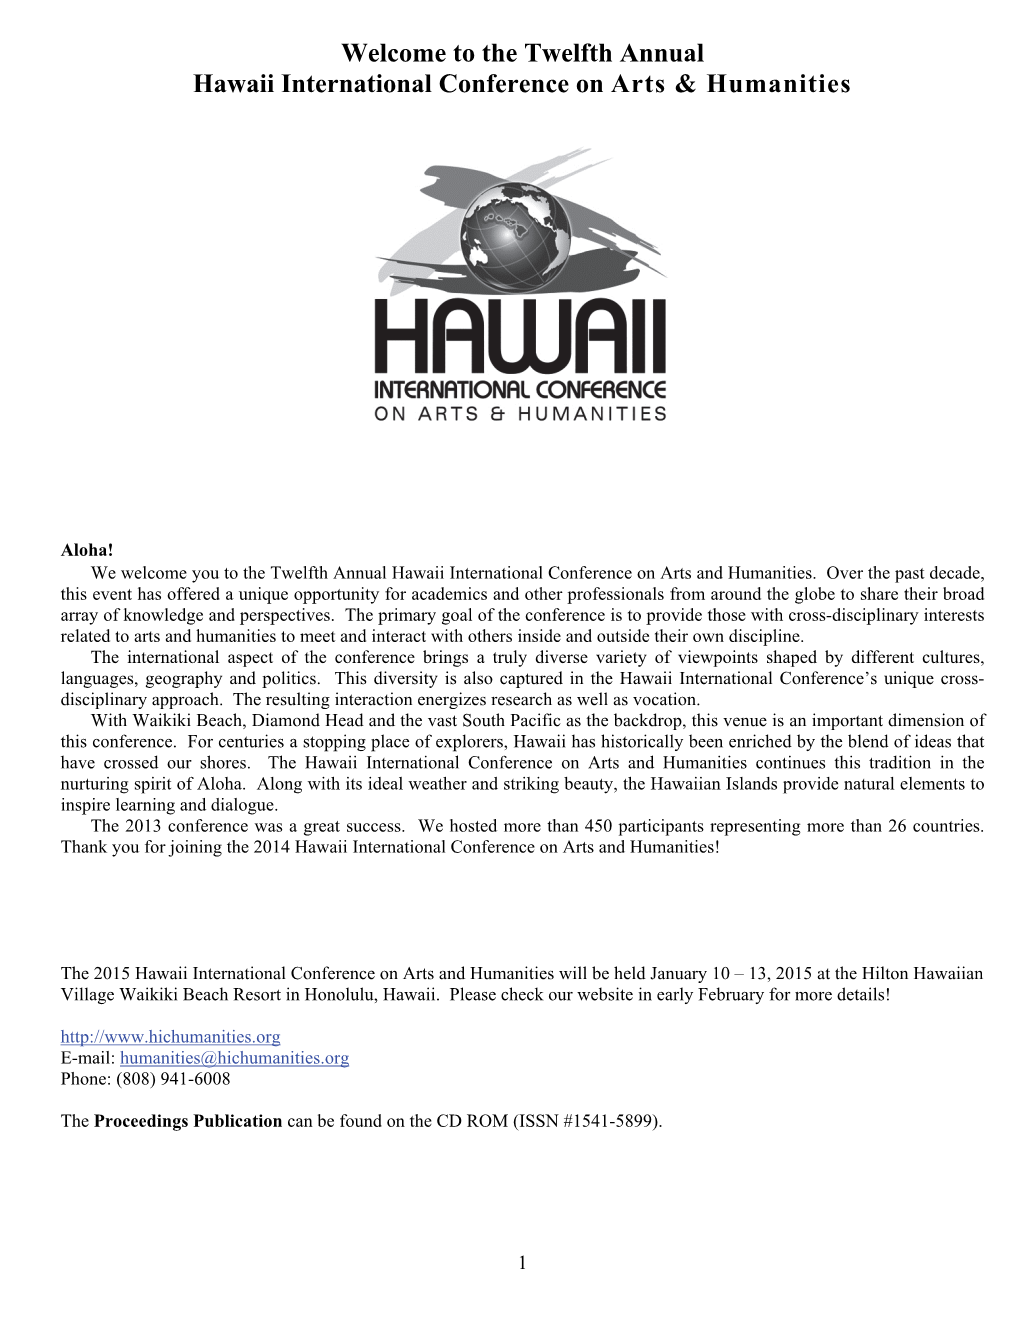 Welcome to the Twelfth Annual Hawaii International Conference on Arts & Humanities